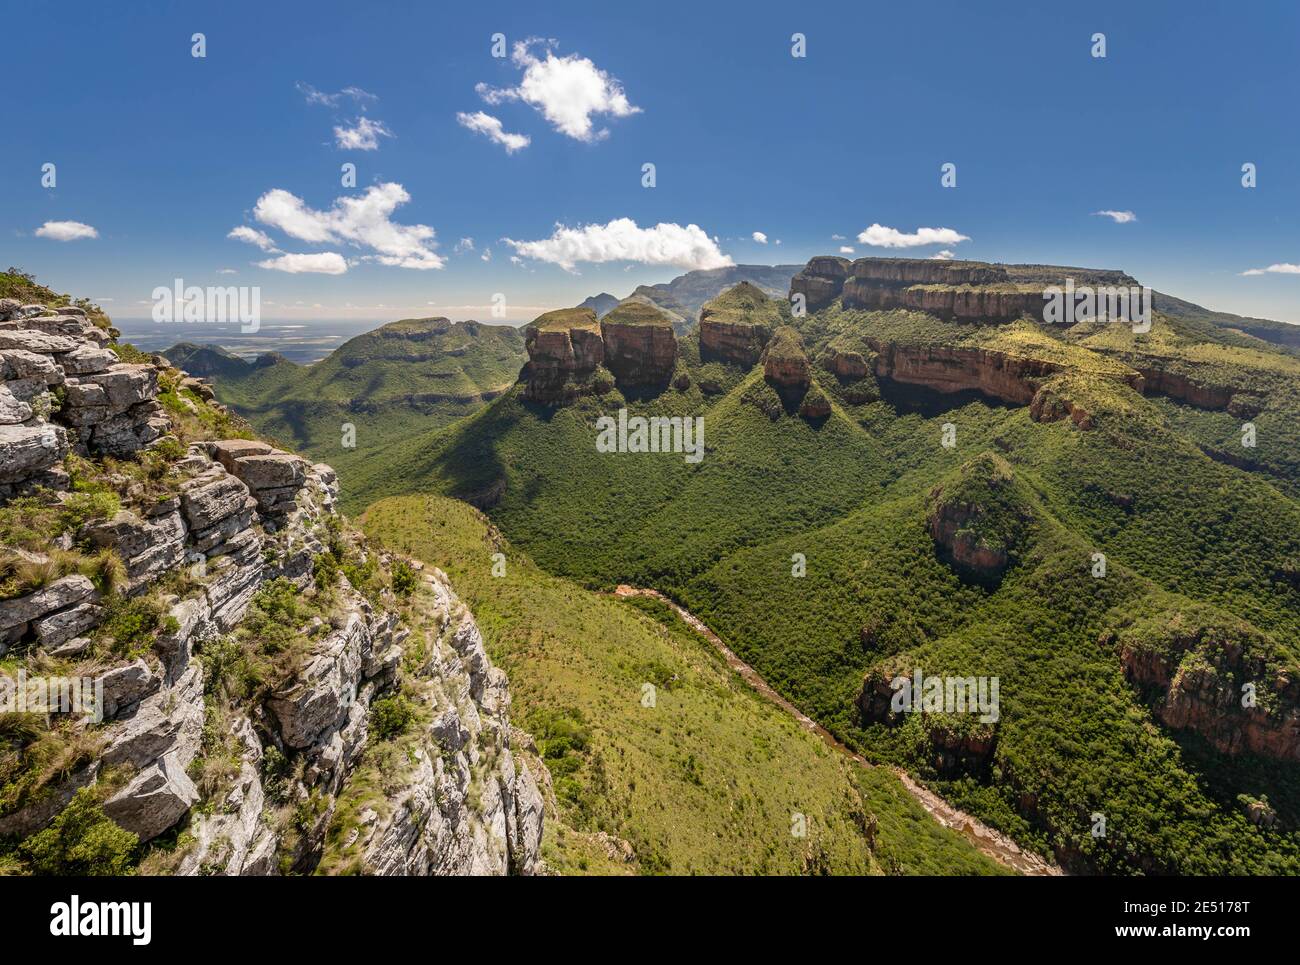 Wide angle shot of the Blyde River Canyon in South Africa as seen from a viewpoint, under a blue sky with puffy cloud Stock Photo